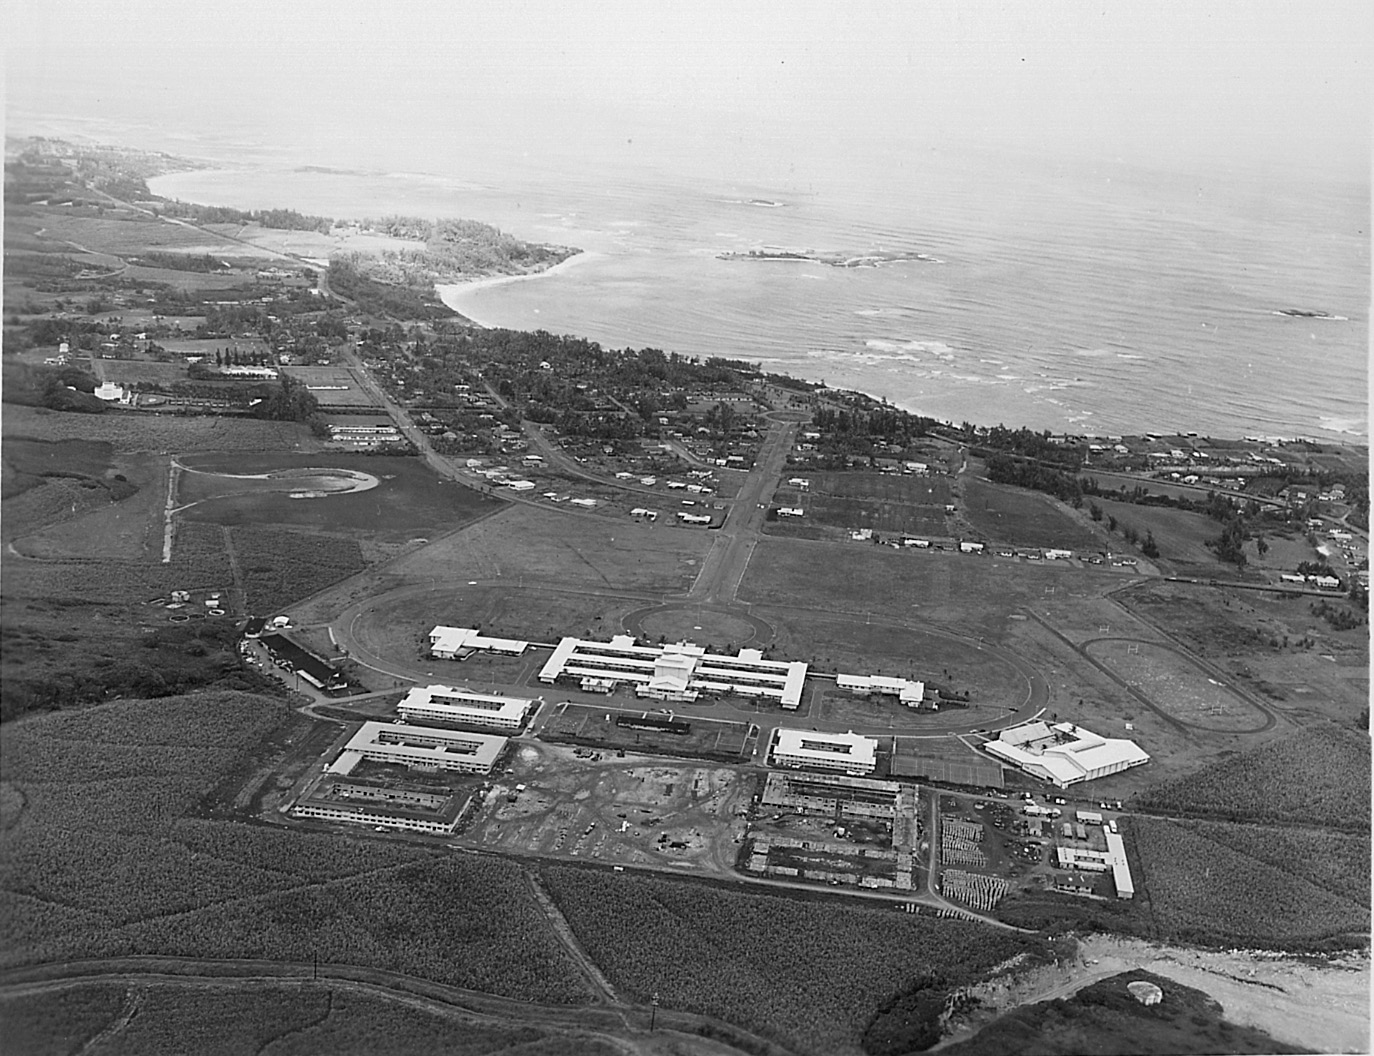 Of the union of the two main roads added in the 1950s—Hale Laʻa extending from the temple (upper left) and Kulanui extending from the college—school president John S. Tanner said, “May these houses of learning and of light also remain linked spiritually.” Courtesy of BYU–Hawaii Archives.